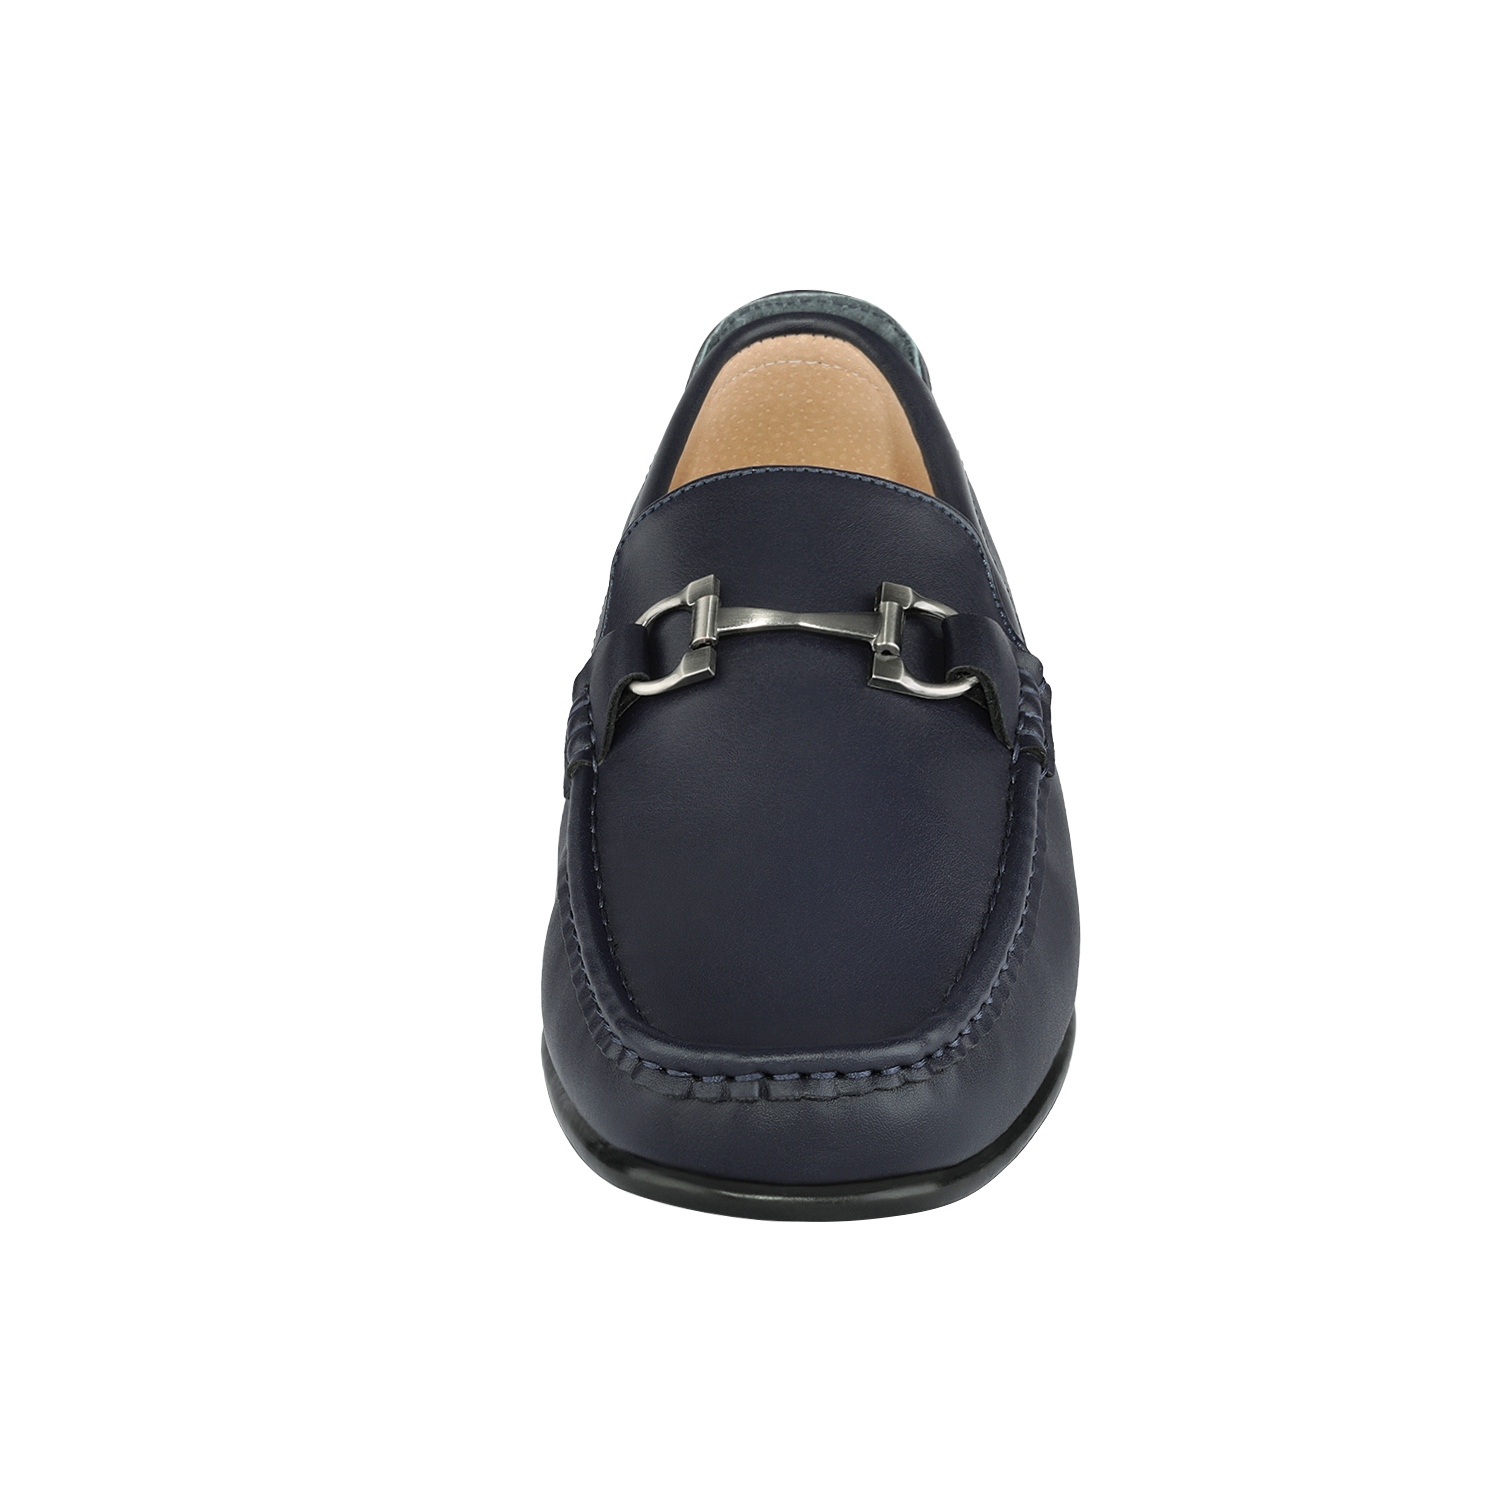 Bruno Marc Men's Moccasin Loafer Shoes Men Dress Loafers Slip On Casual Penny Comfort Outdoor Loafers HENRY-1 NAVY Size 7.5 - image 2 of 5